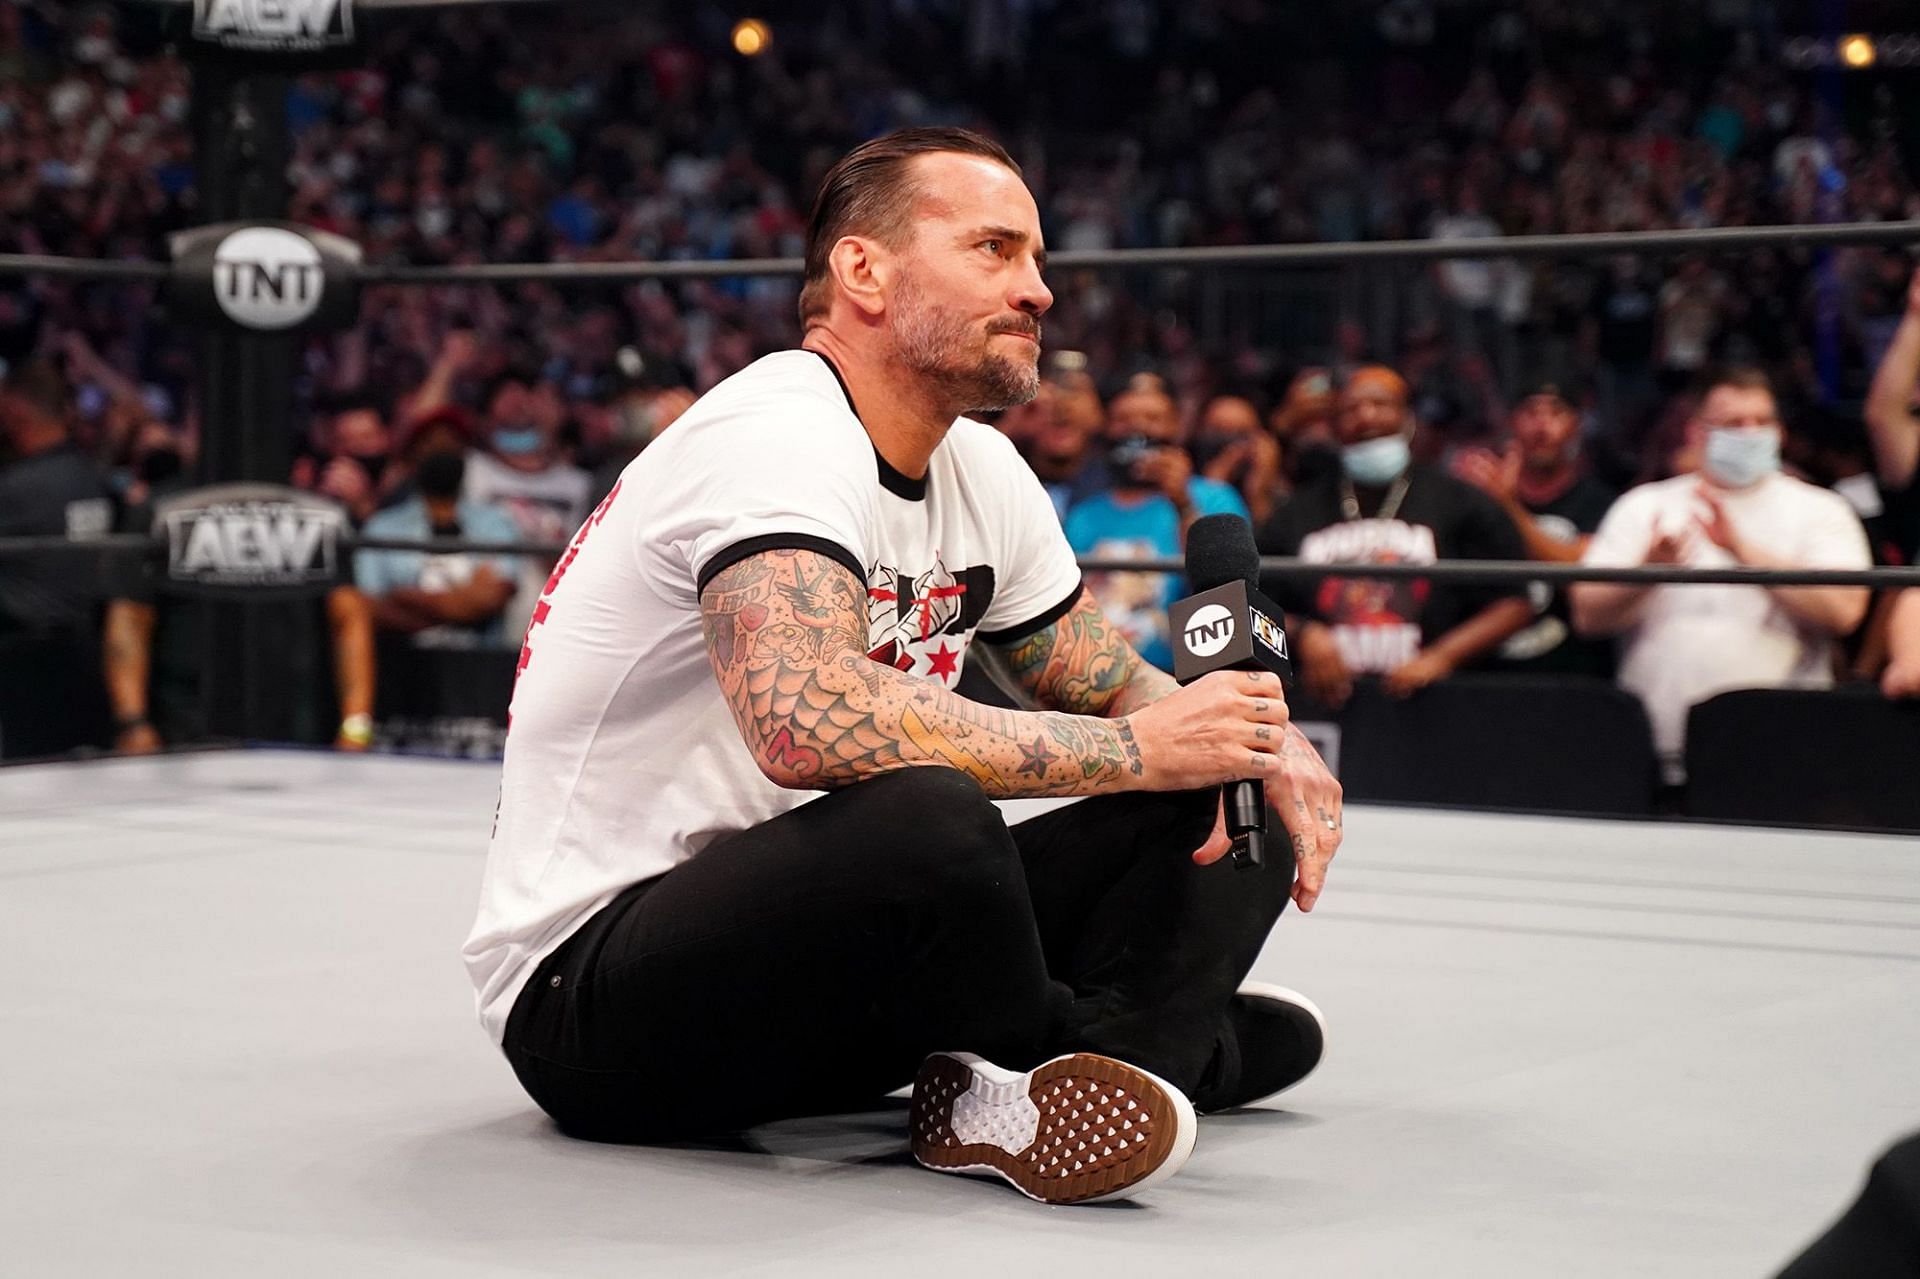 Who should CM Punk challenge next in AEW?